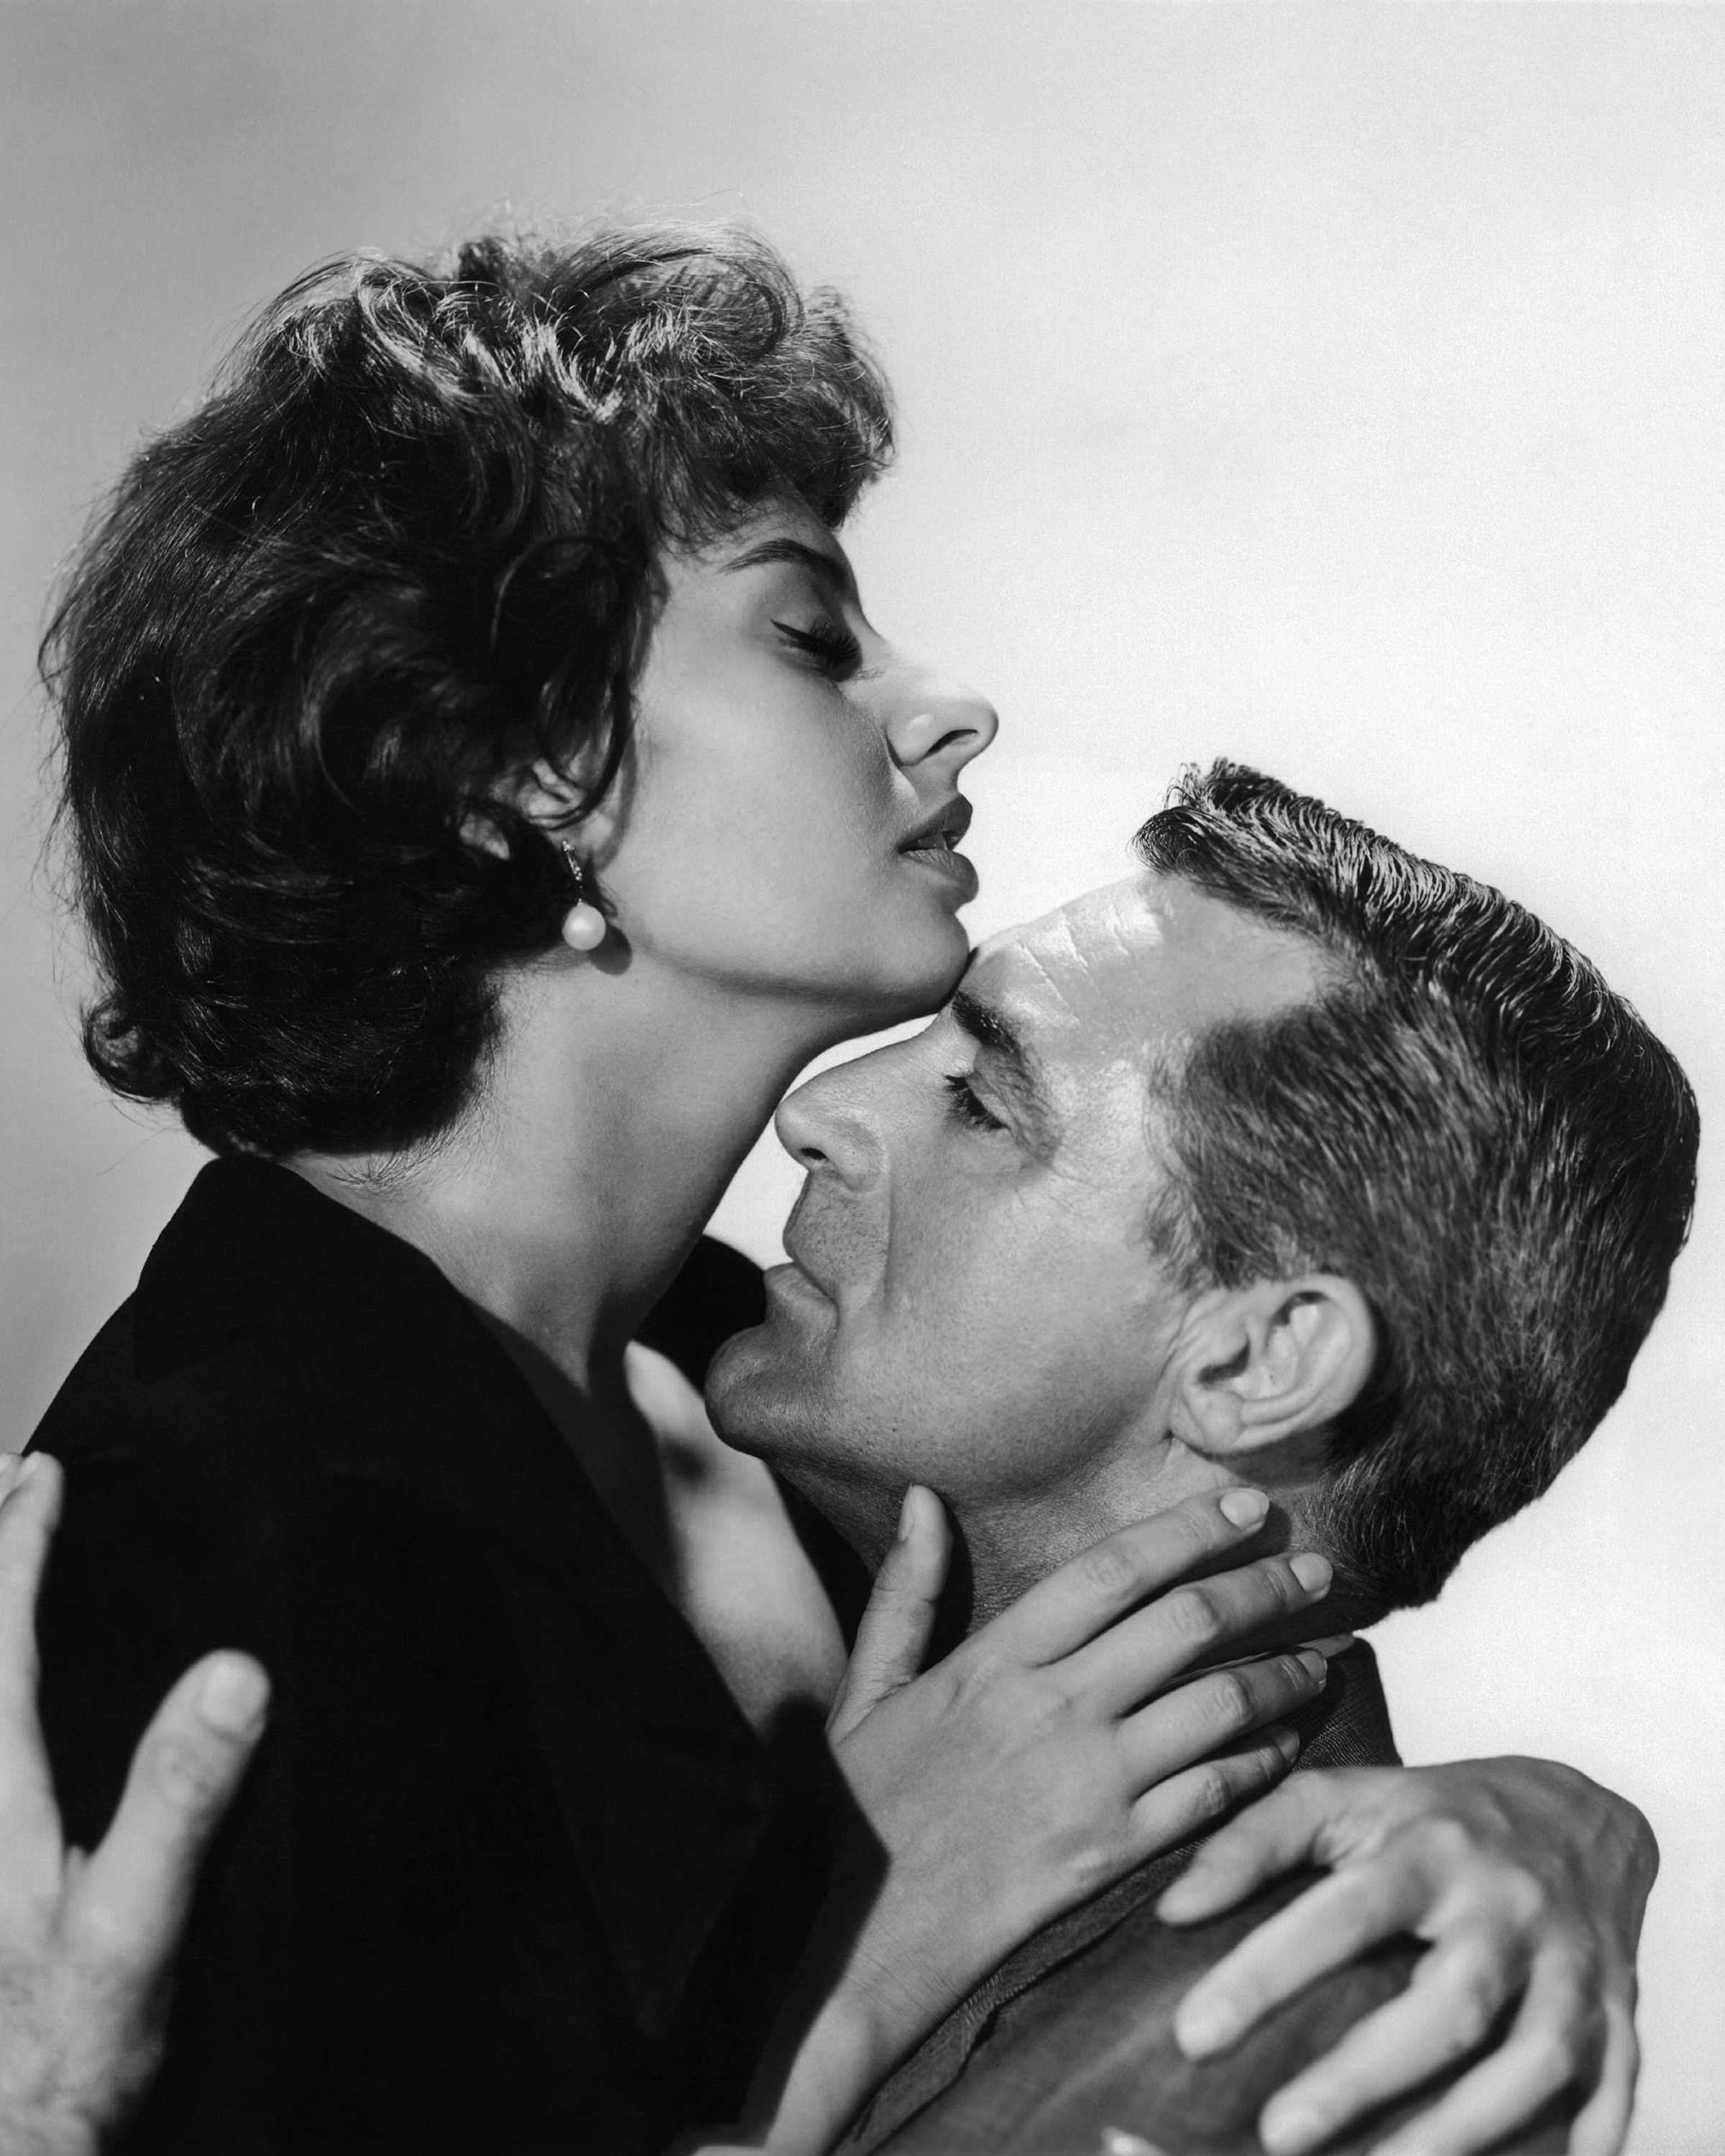 Actor Cary Grant as Tom Winters and actress Sophia Loren as Cinzia Zaccardi in the film "Houseboat," 1958. | Photo: Getty Images